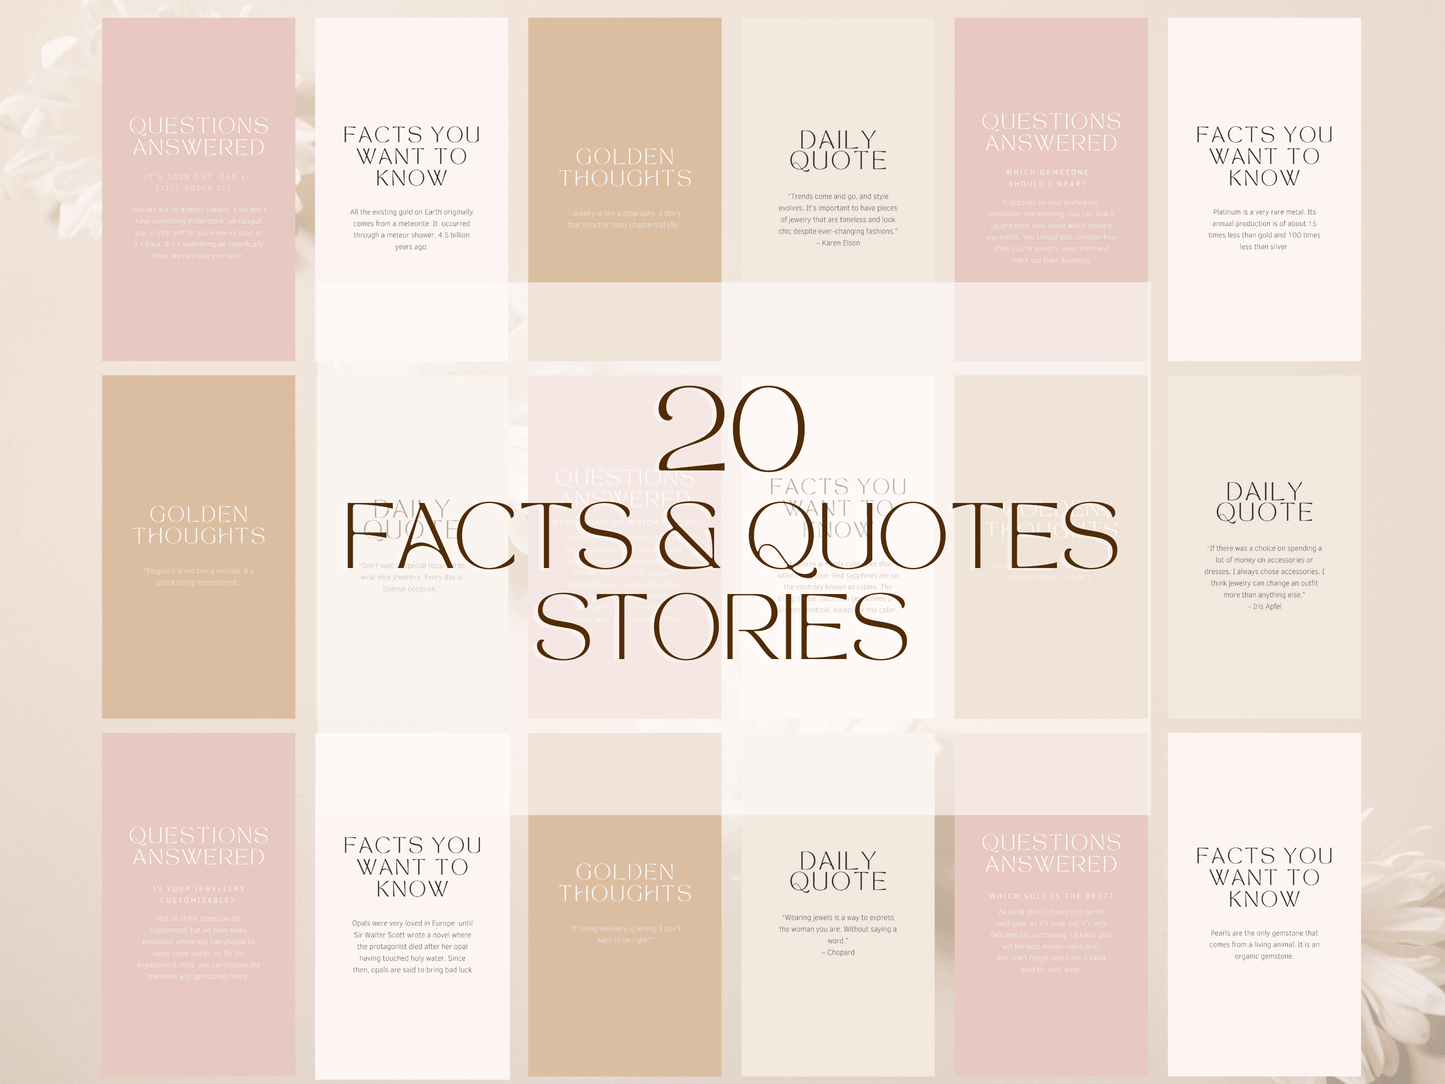 Instagram facts and quotes story templates with aesthetic font and boho colors for content creators and business owners.